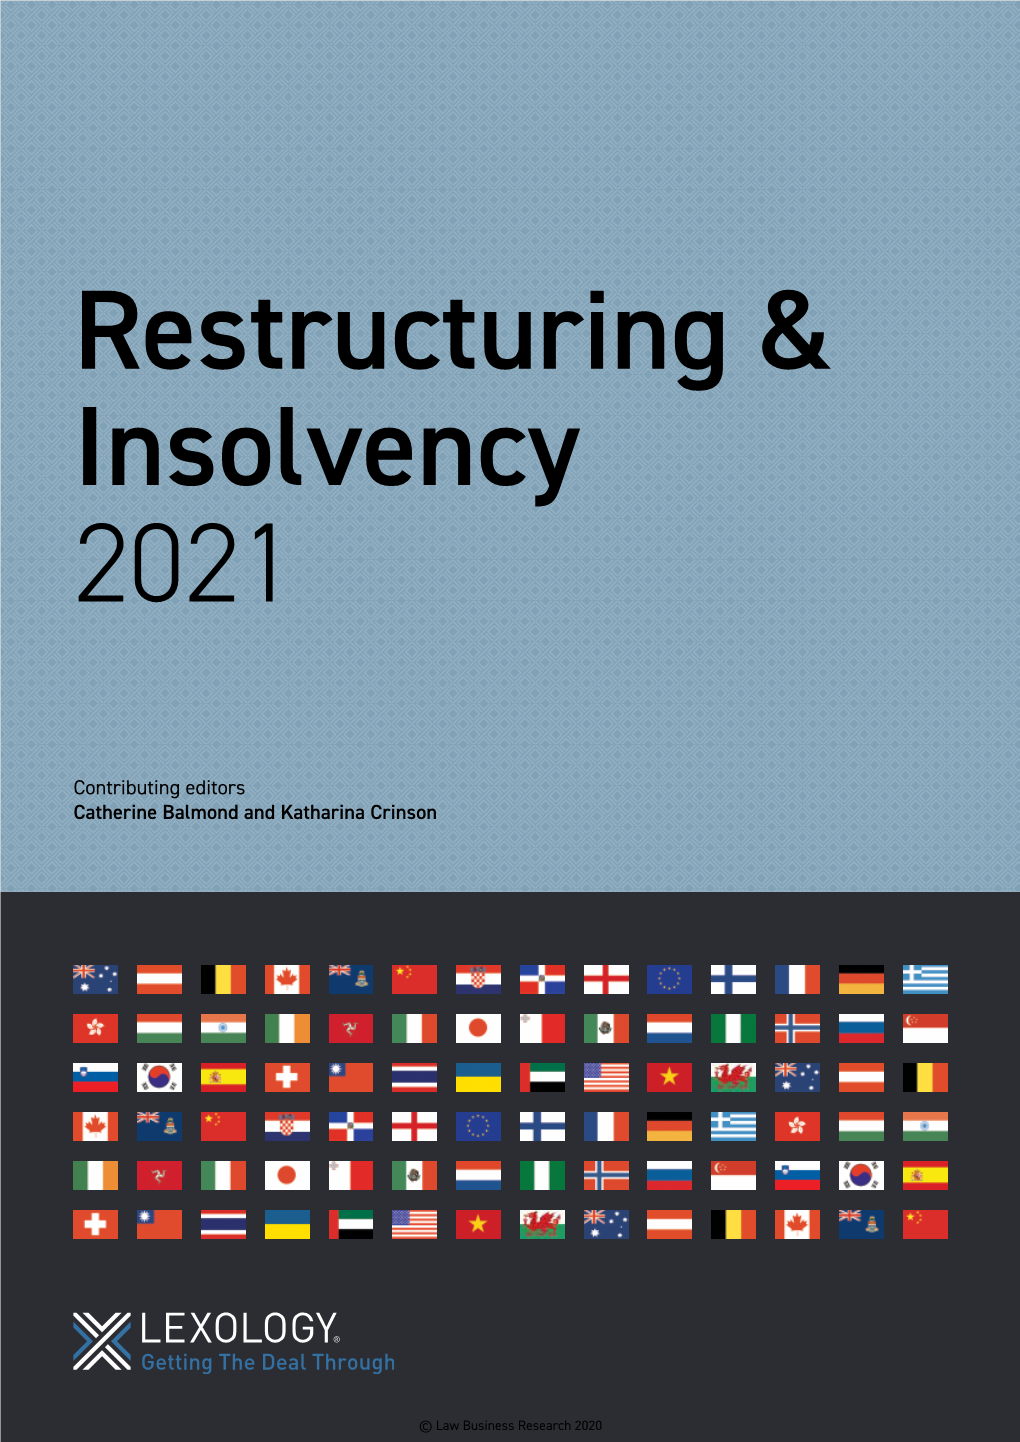 Restructuring & Insolvency 2021